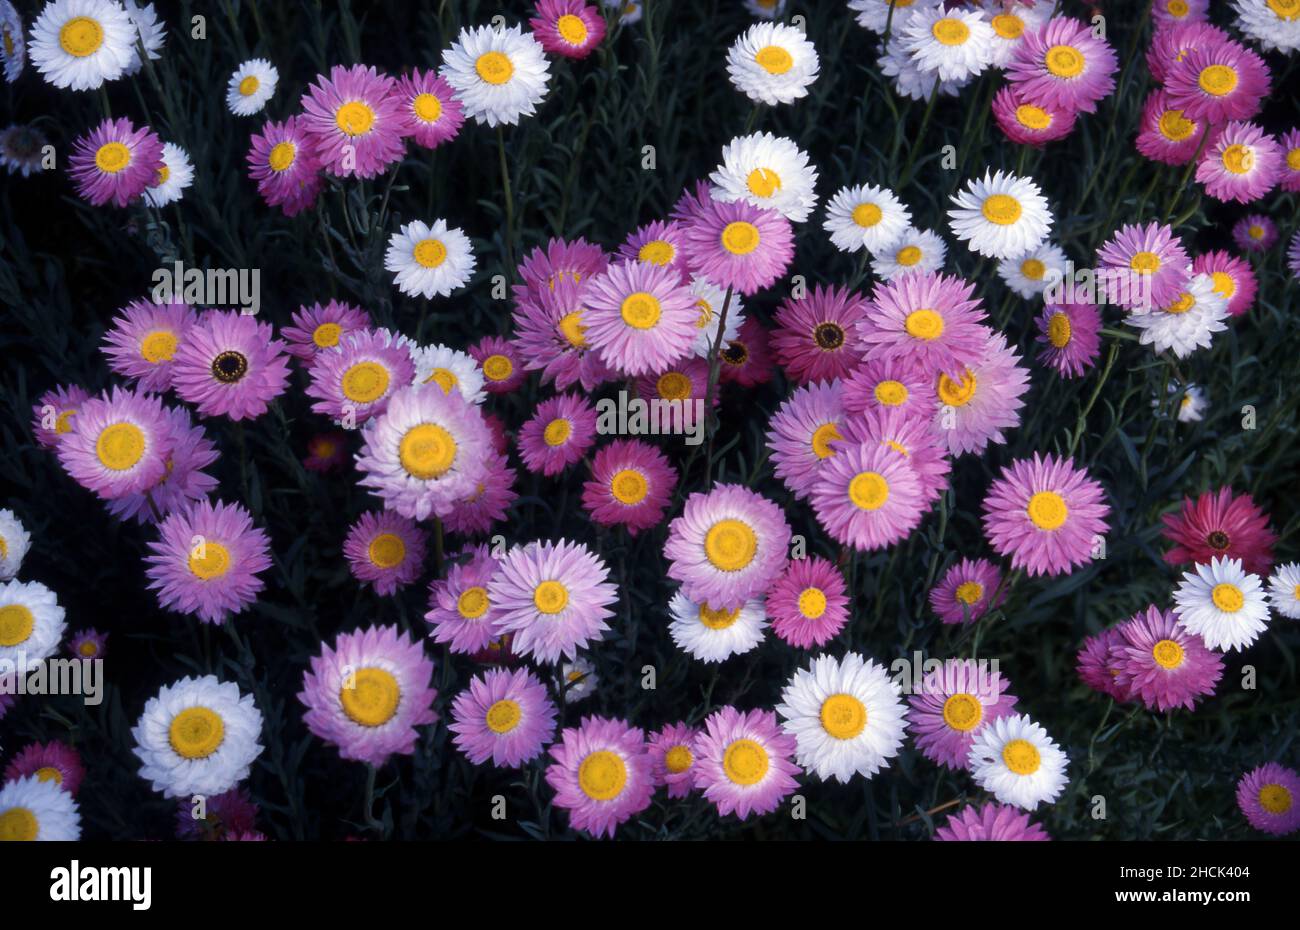 PINK AND WHITE PAPER DAISIES (RHODODANTHE SYN HELIPTERUM) Stock Photo